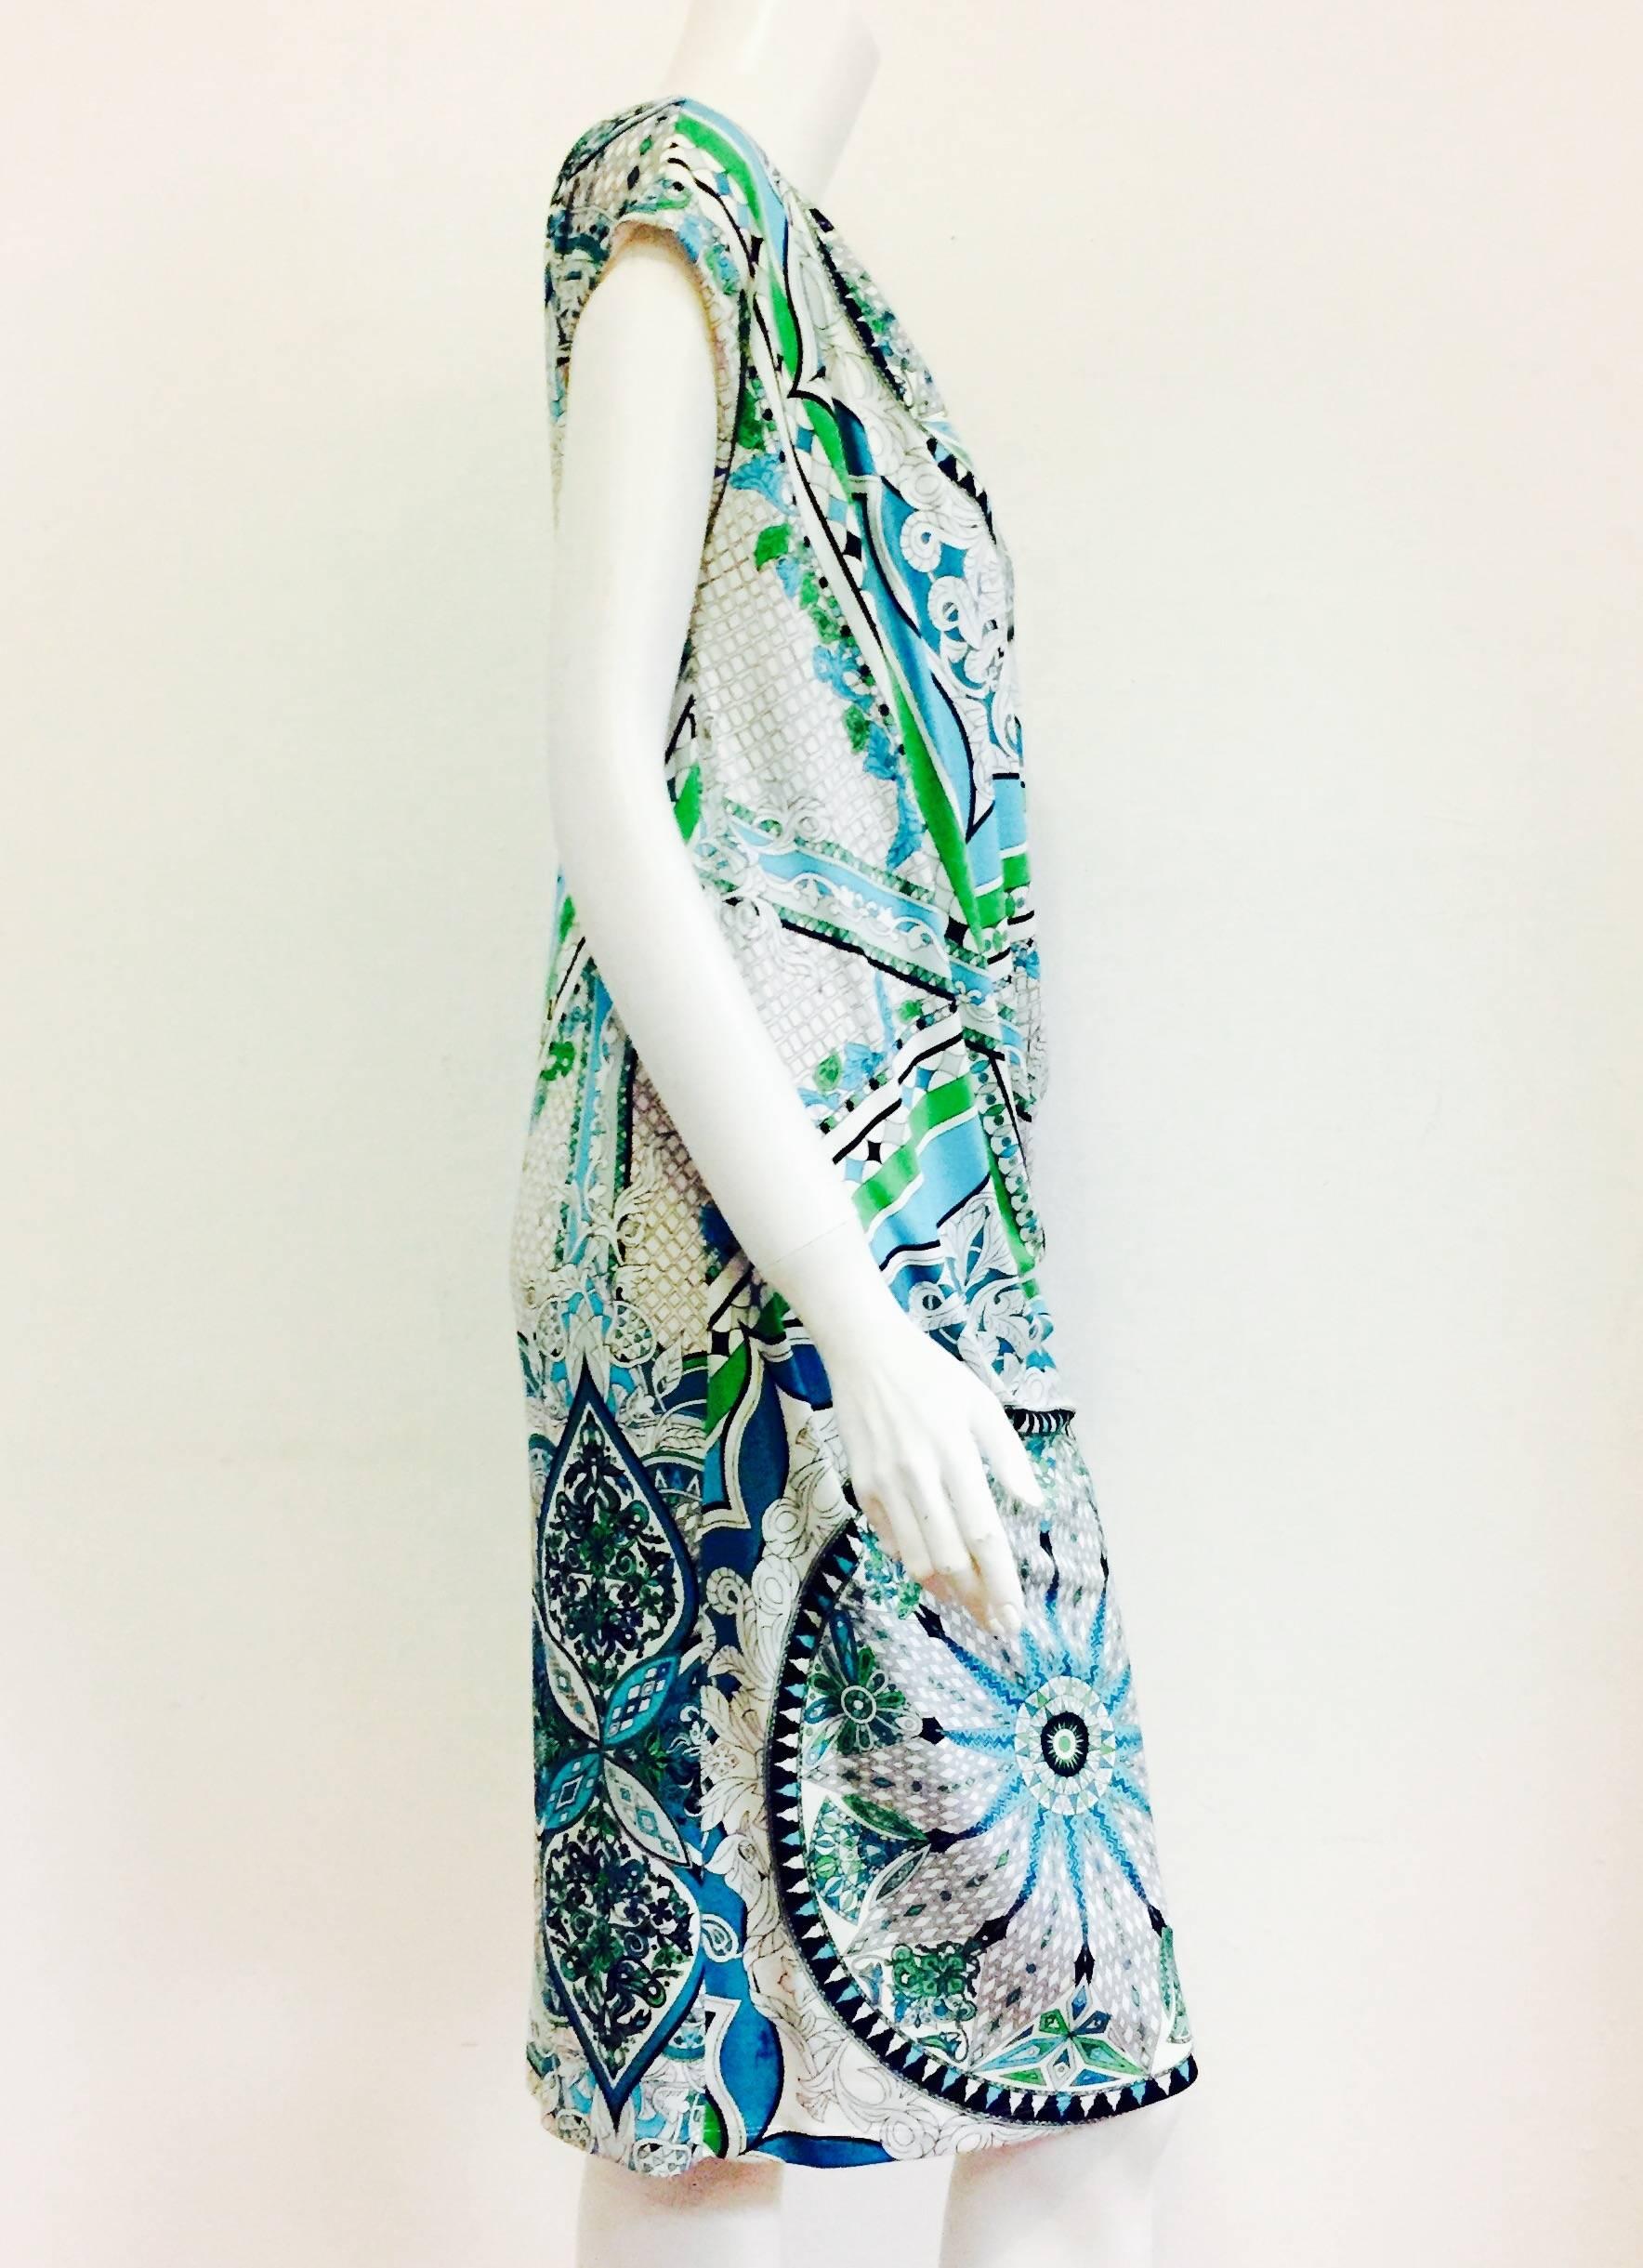 In the abstracted colorful style we've come to know and love, this Emilio Pucci dress is a timeless addition to any wardrobe. Featuring soft and silky viscose fabric in a geometric print in shades of blues and greens. A sleeveless style that hits